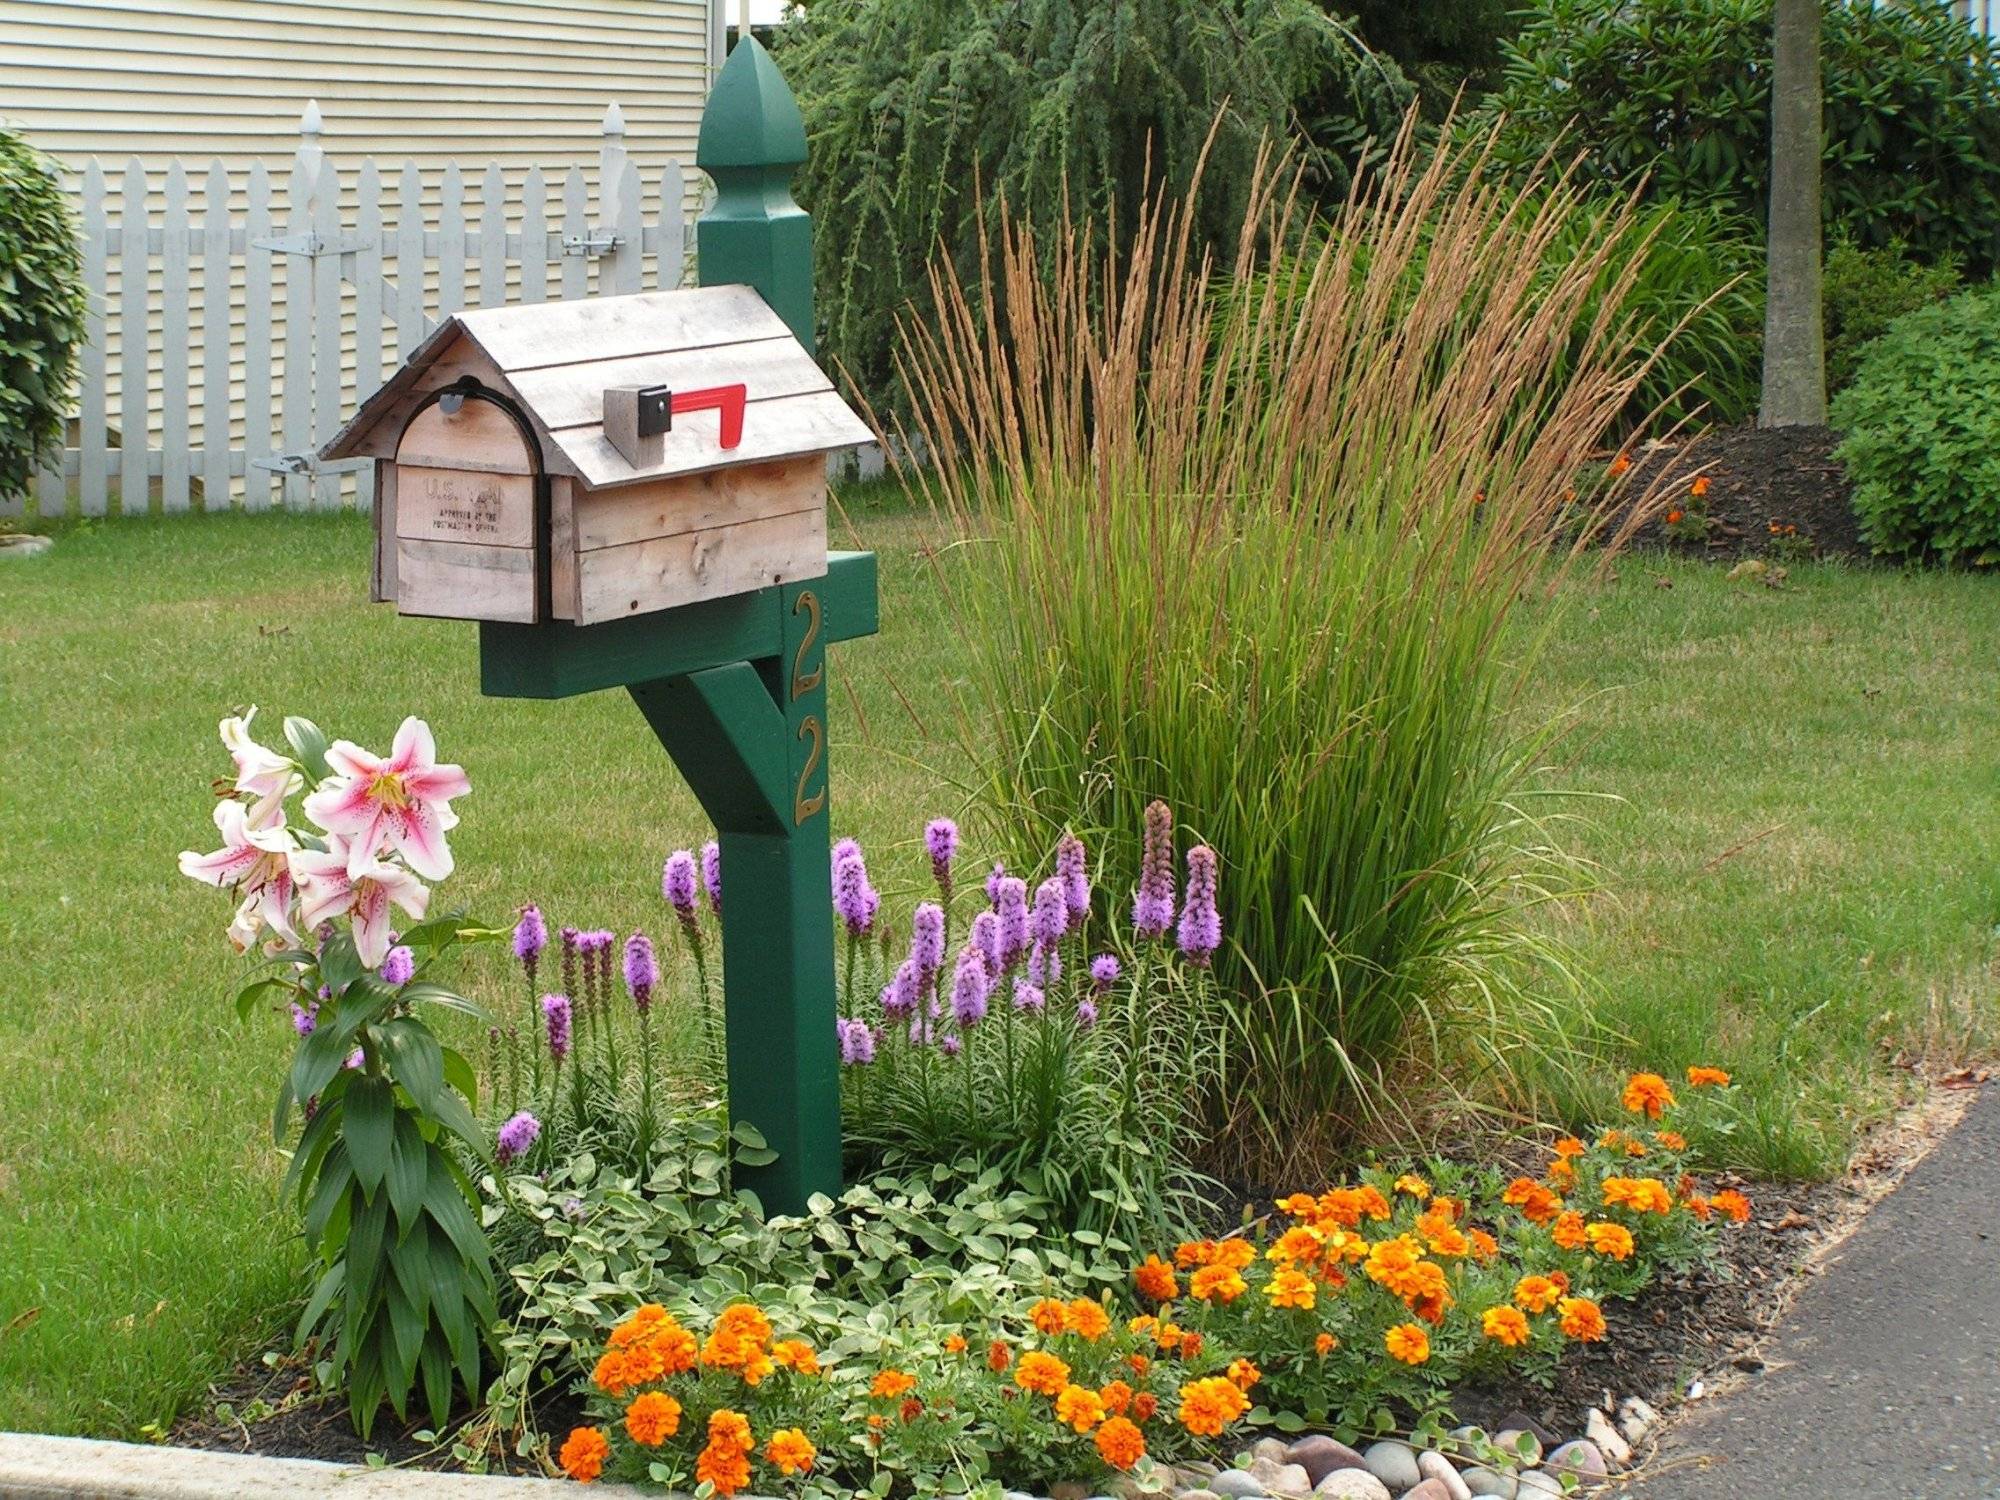 30 Mailbox Landscaping Ideas To Transform Your Home's Exterior - 213